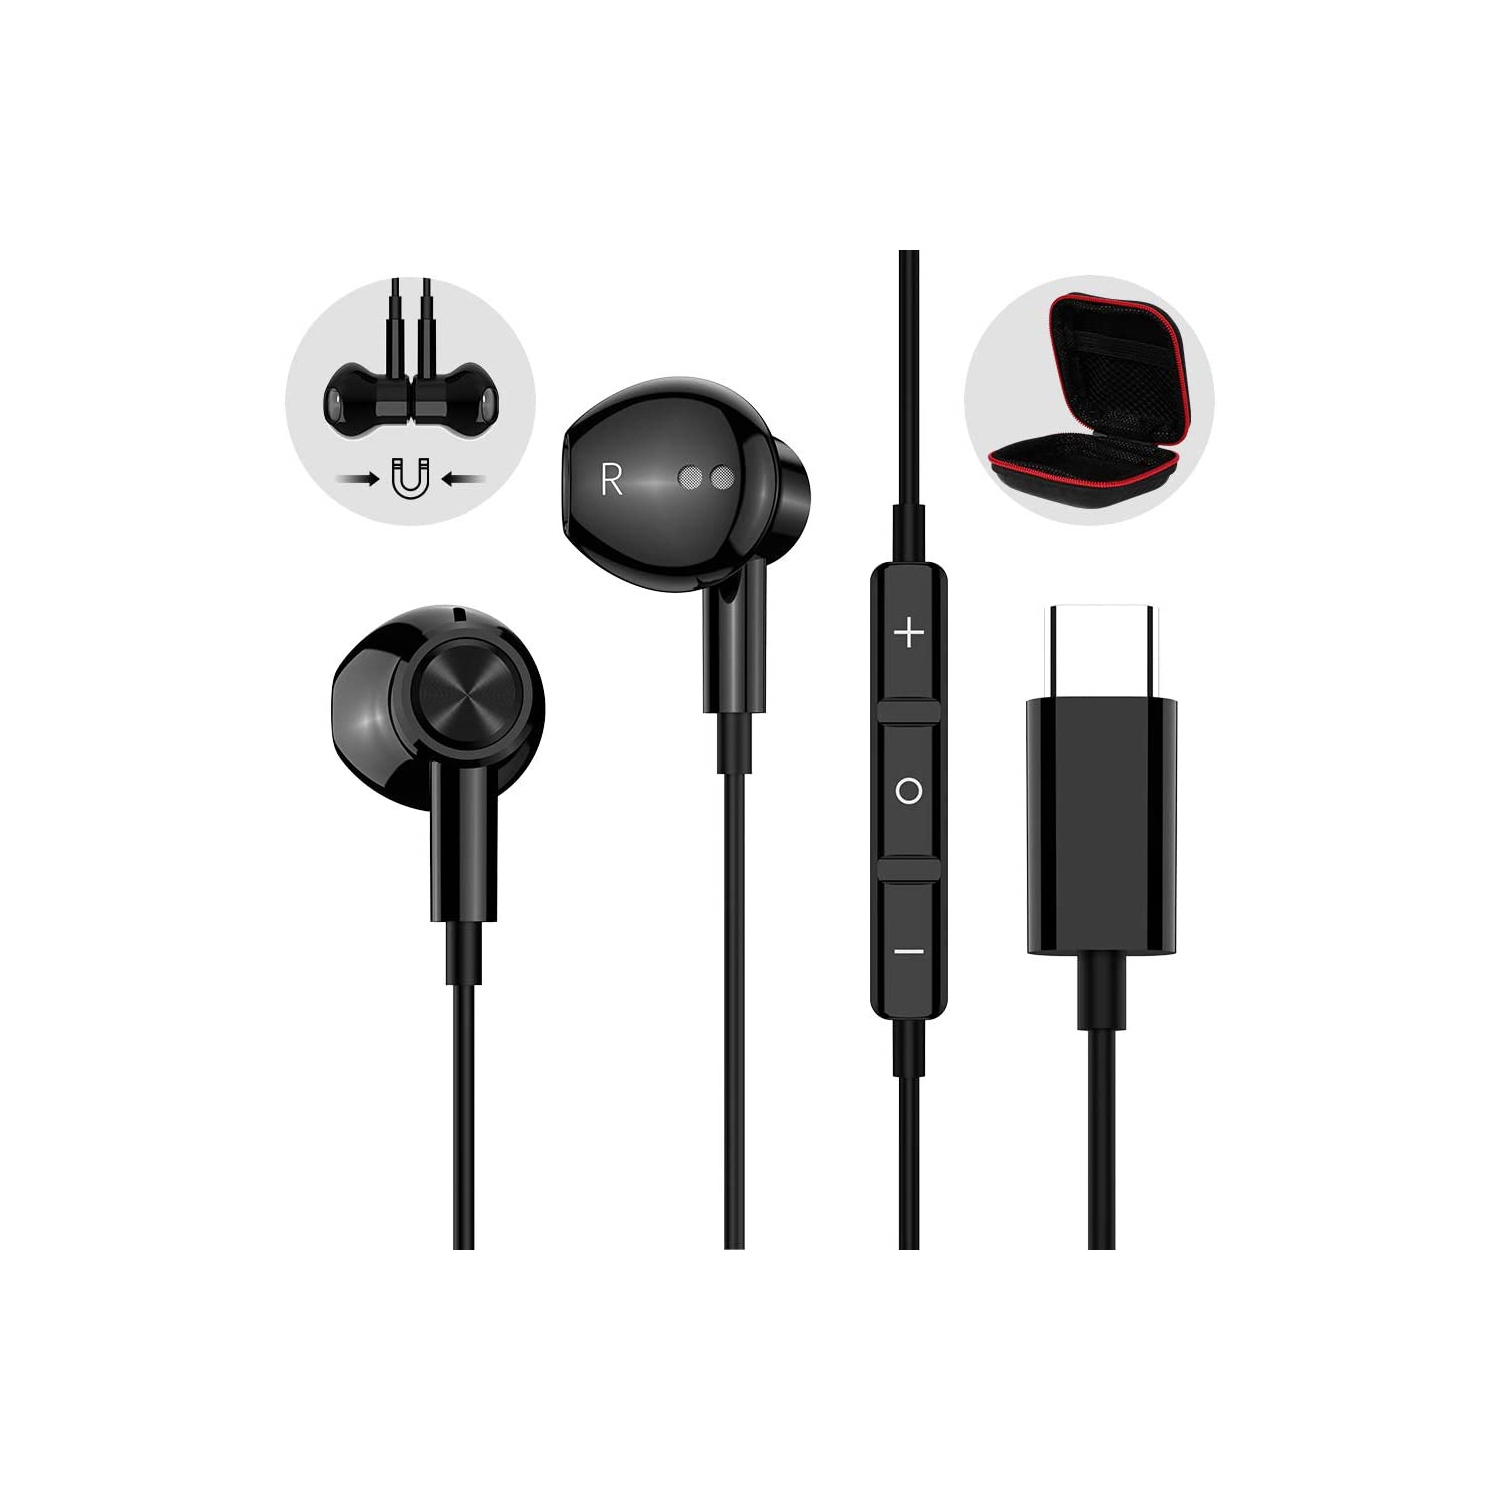 USB C Headphones for Galaxy S20 FE, HiFi Stereo Magnetic Wired Earbuds with Mic, Type C Headphones for Samsung S20 Note